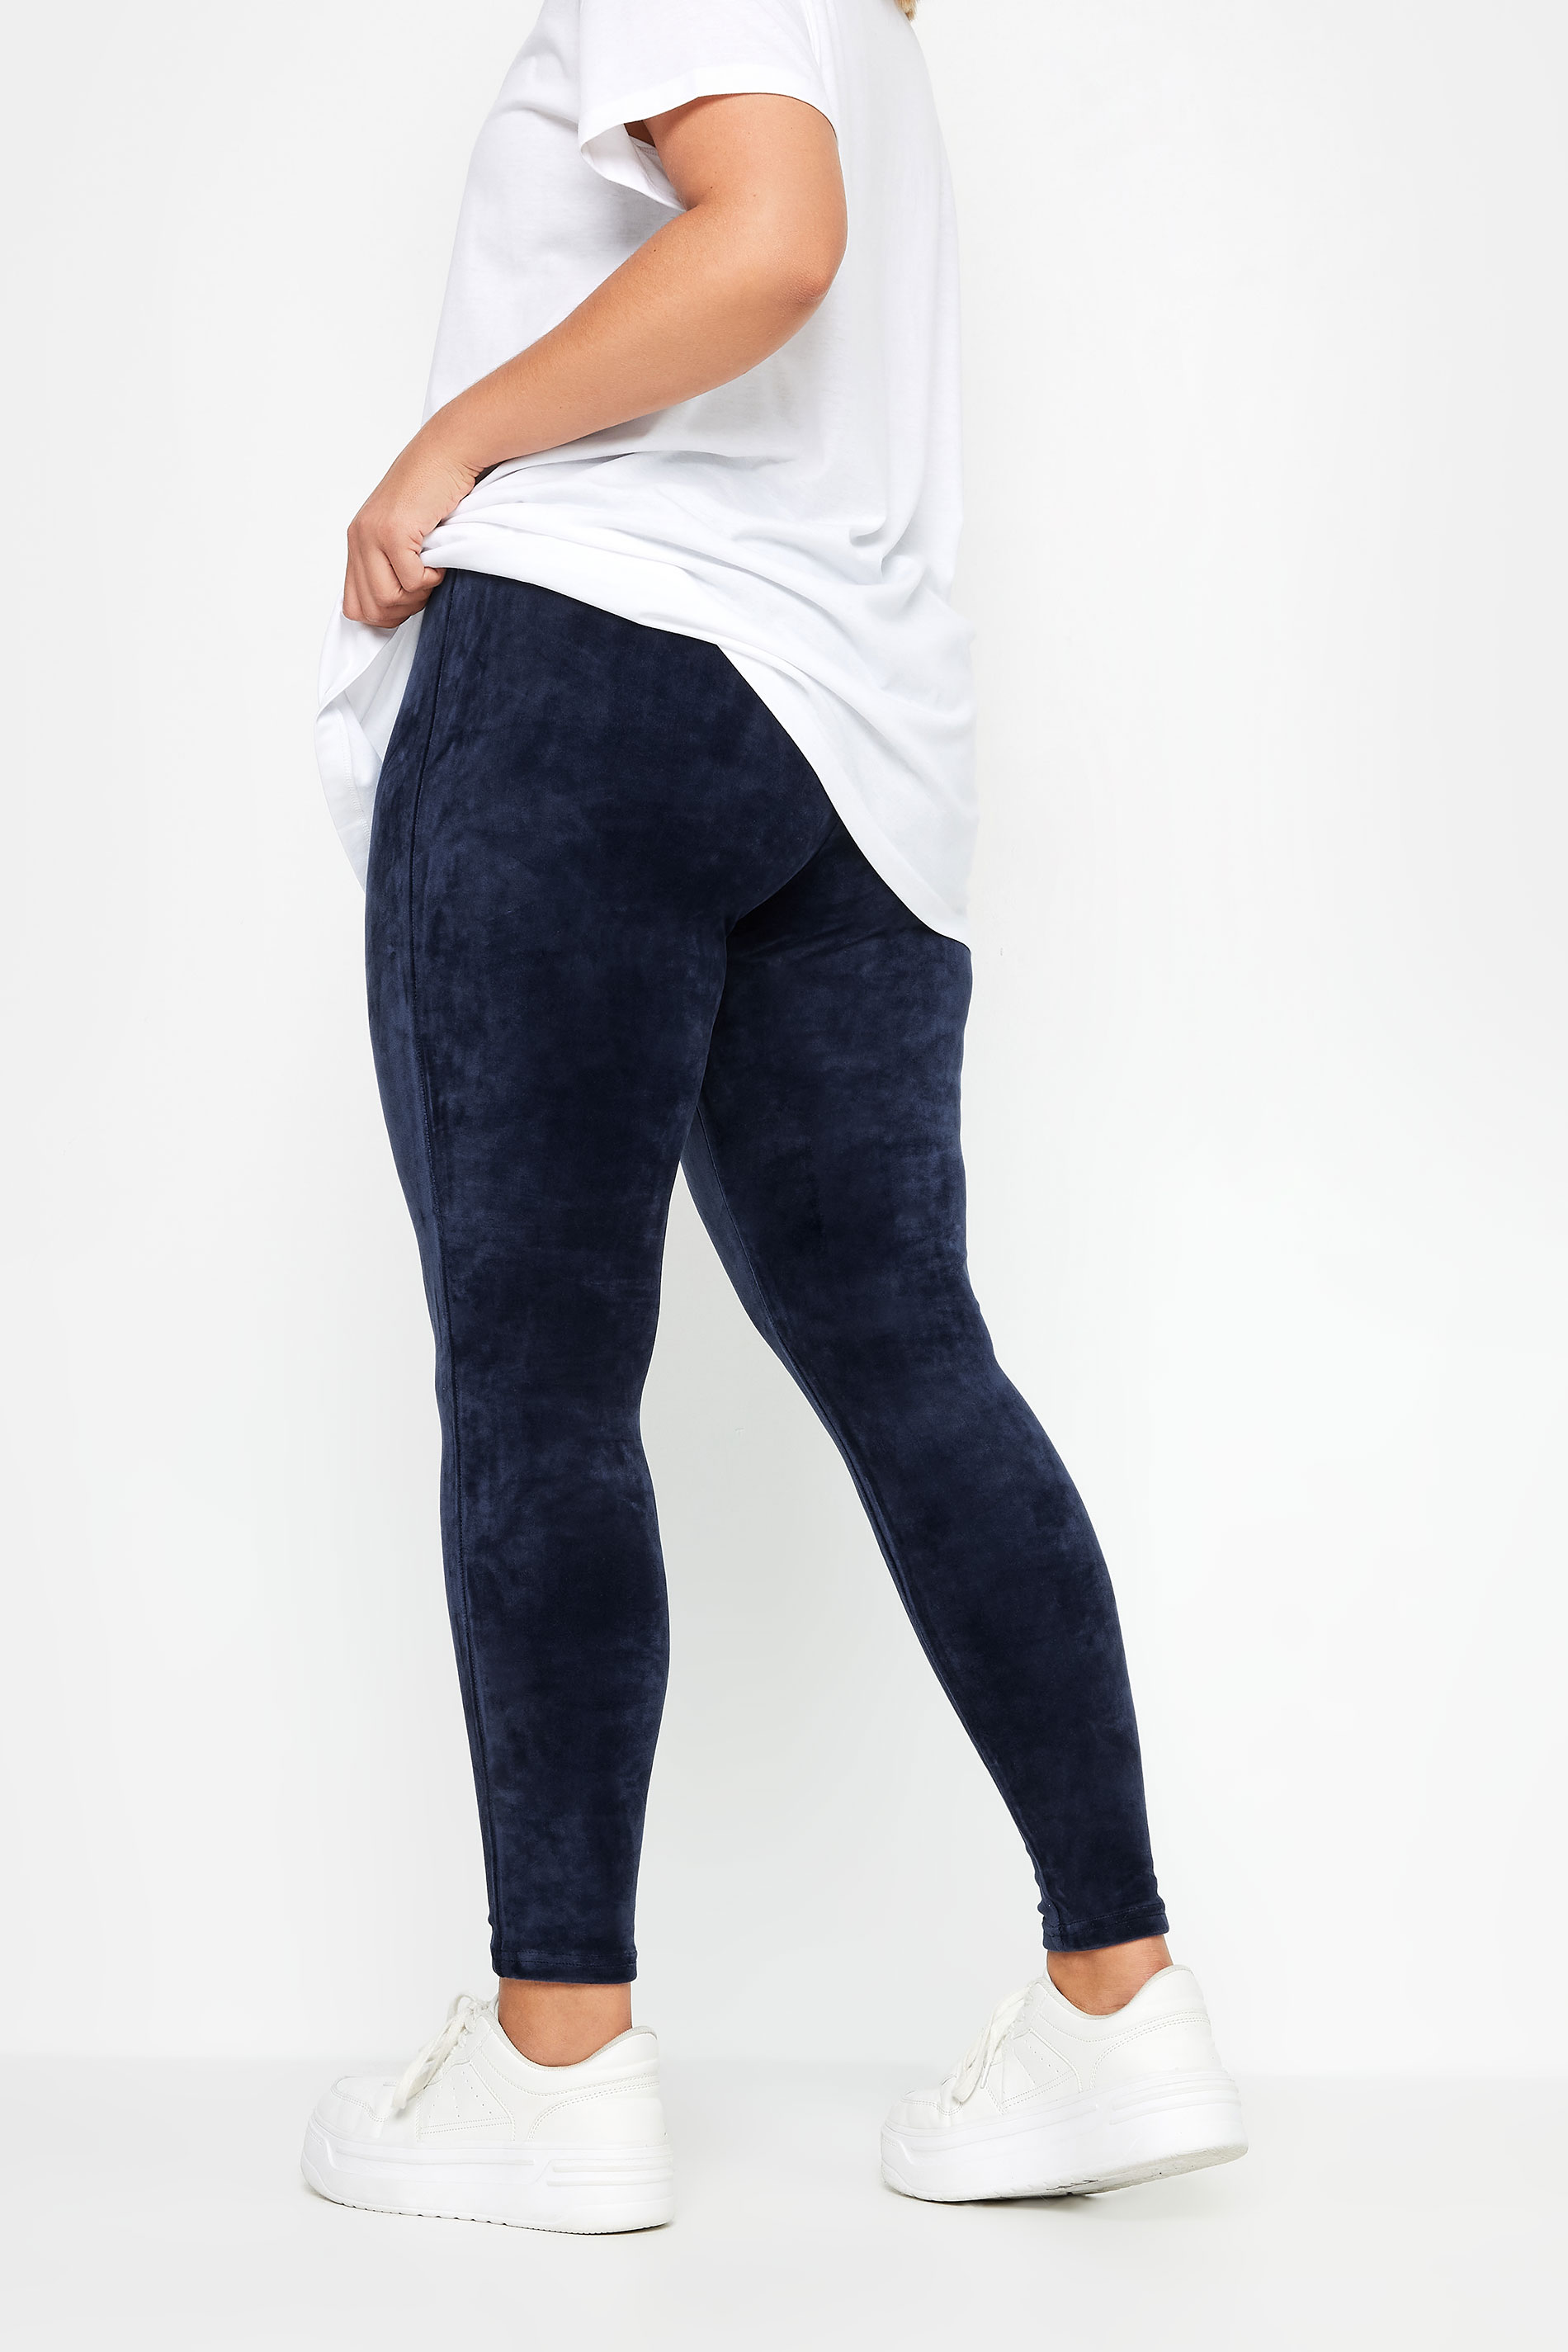 YOURS Plus Size Navy Blue Velour Leggings | Yours Clothing 3